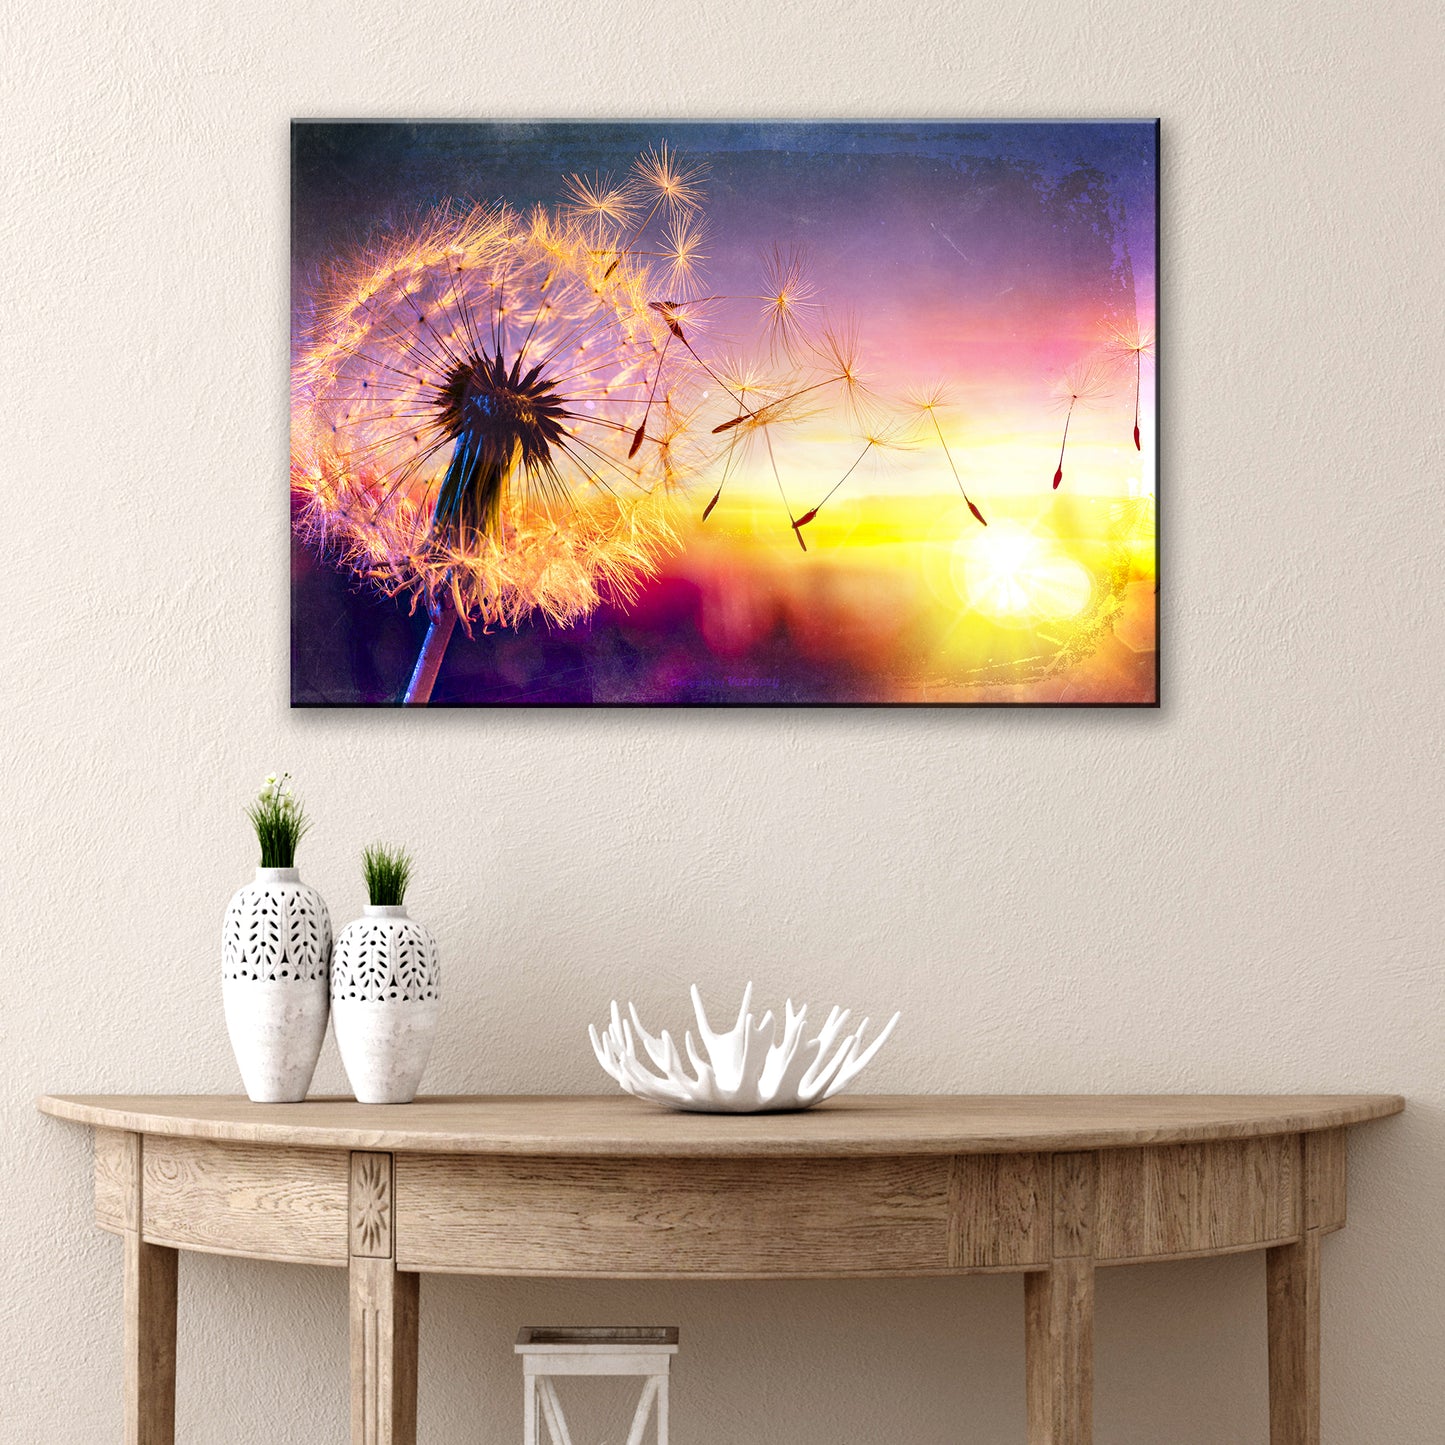 Dandelion At Sunset Canvas Wall Art - Image by Tailored Canvases